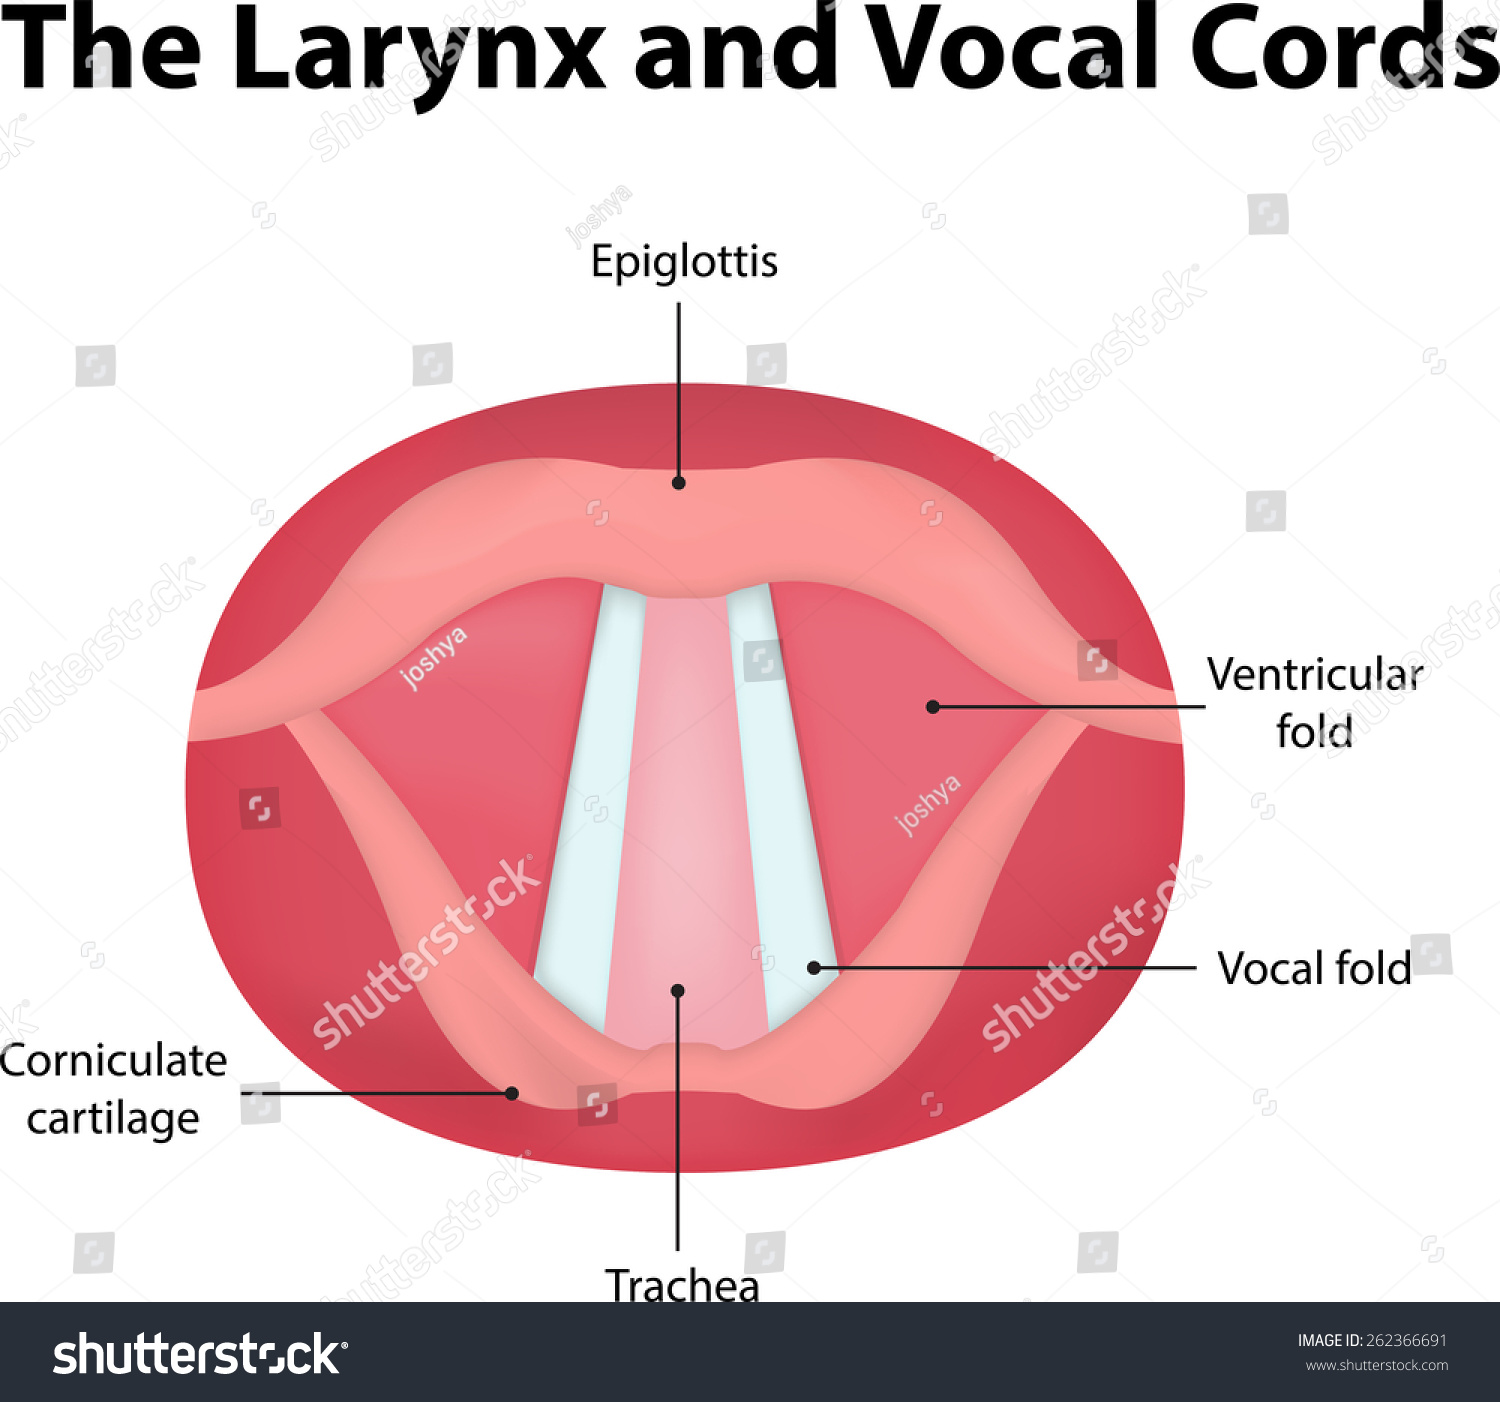 The Larynx And Vocal Cord Labeled Diagram Stock Photo 262366691